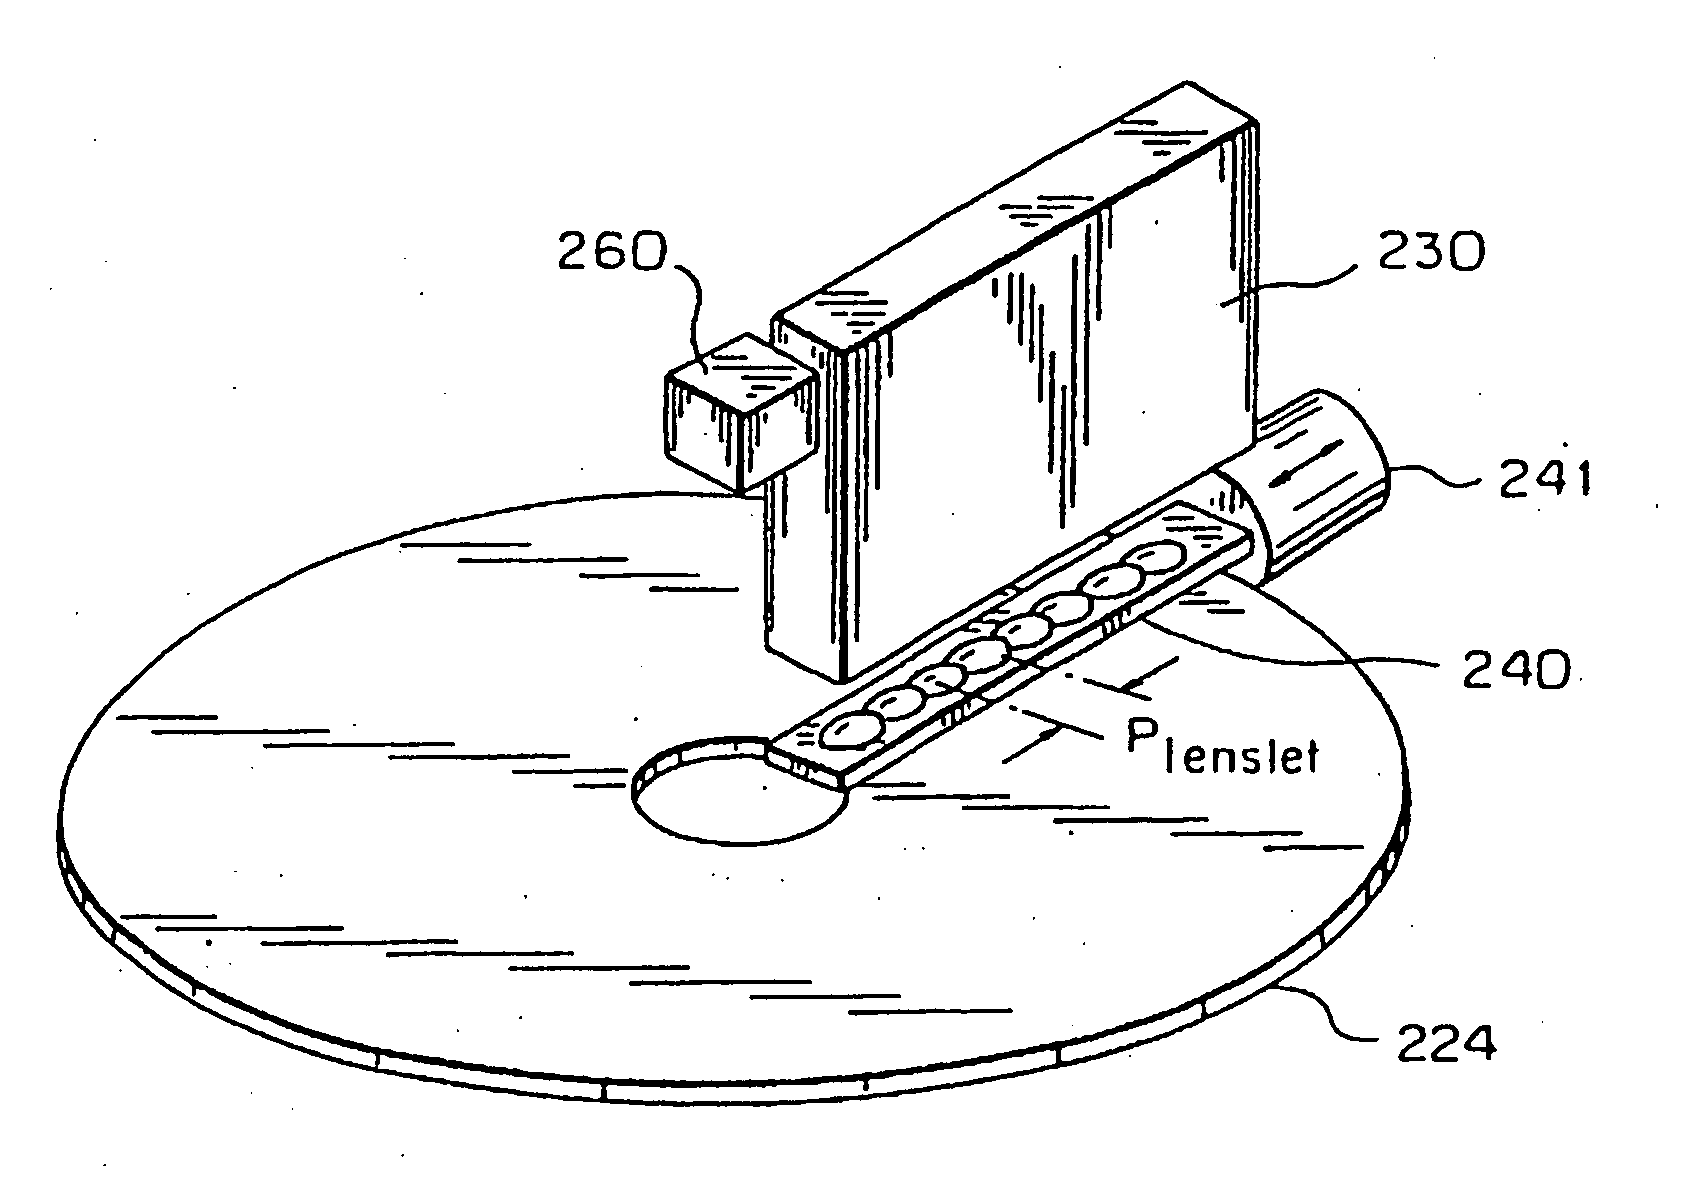 Optical disk drive using one dimensional scanning